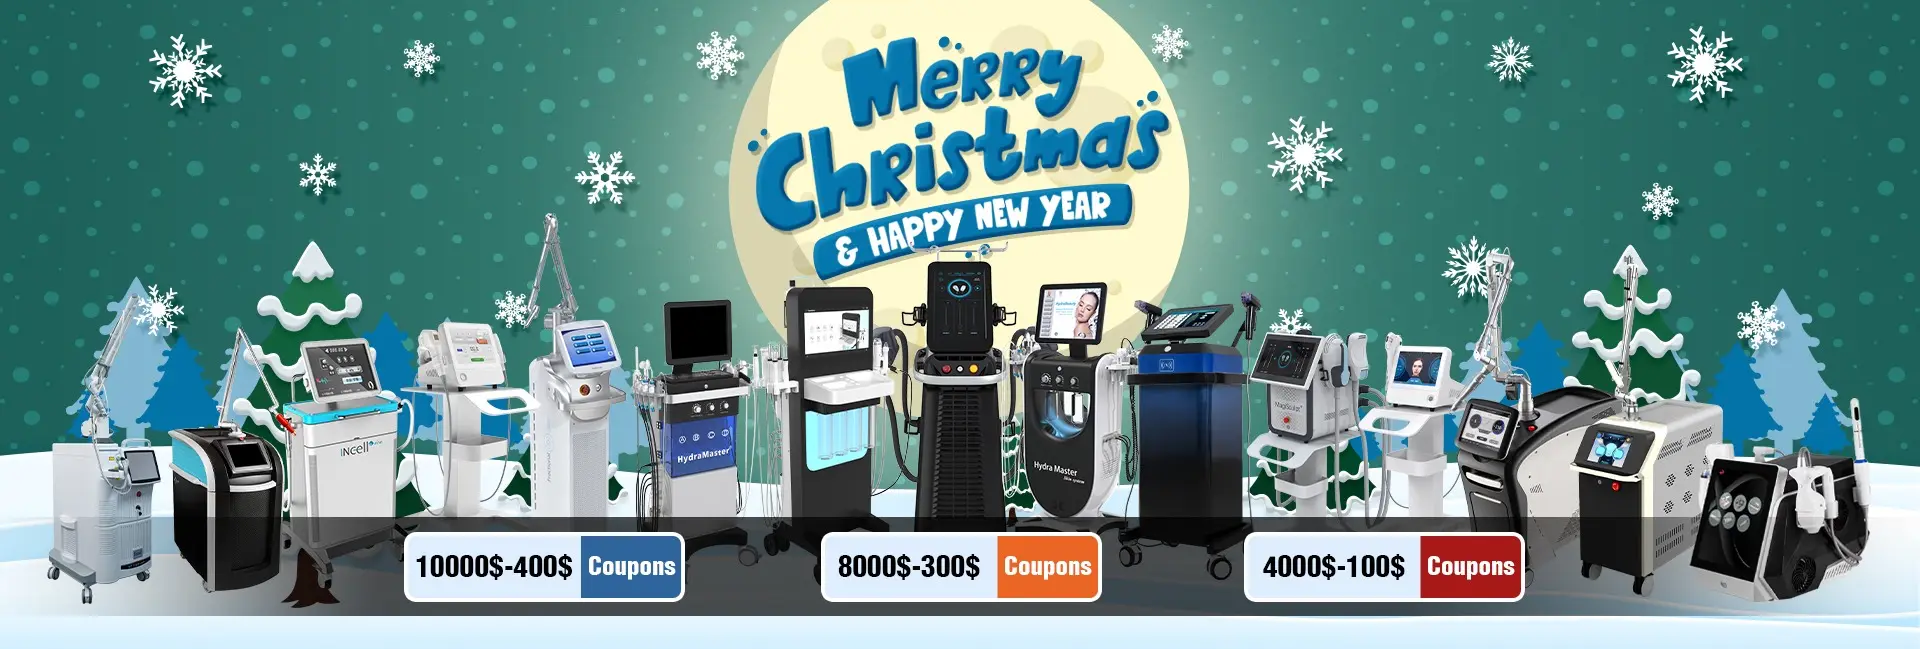 Christmas Promotion for beauty aesthetic machines